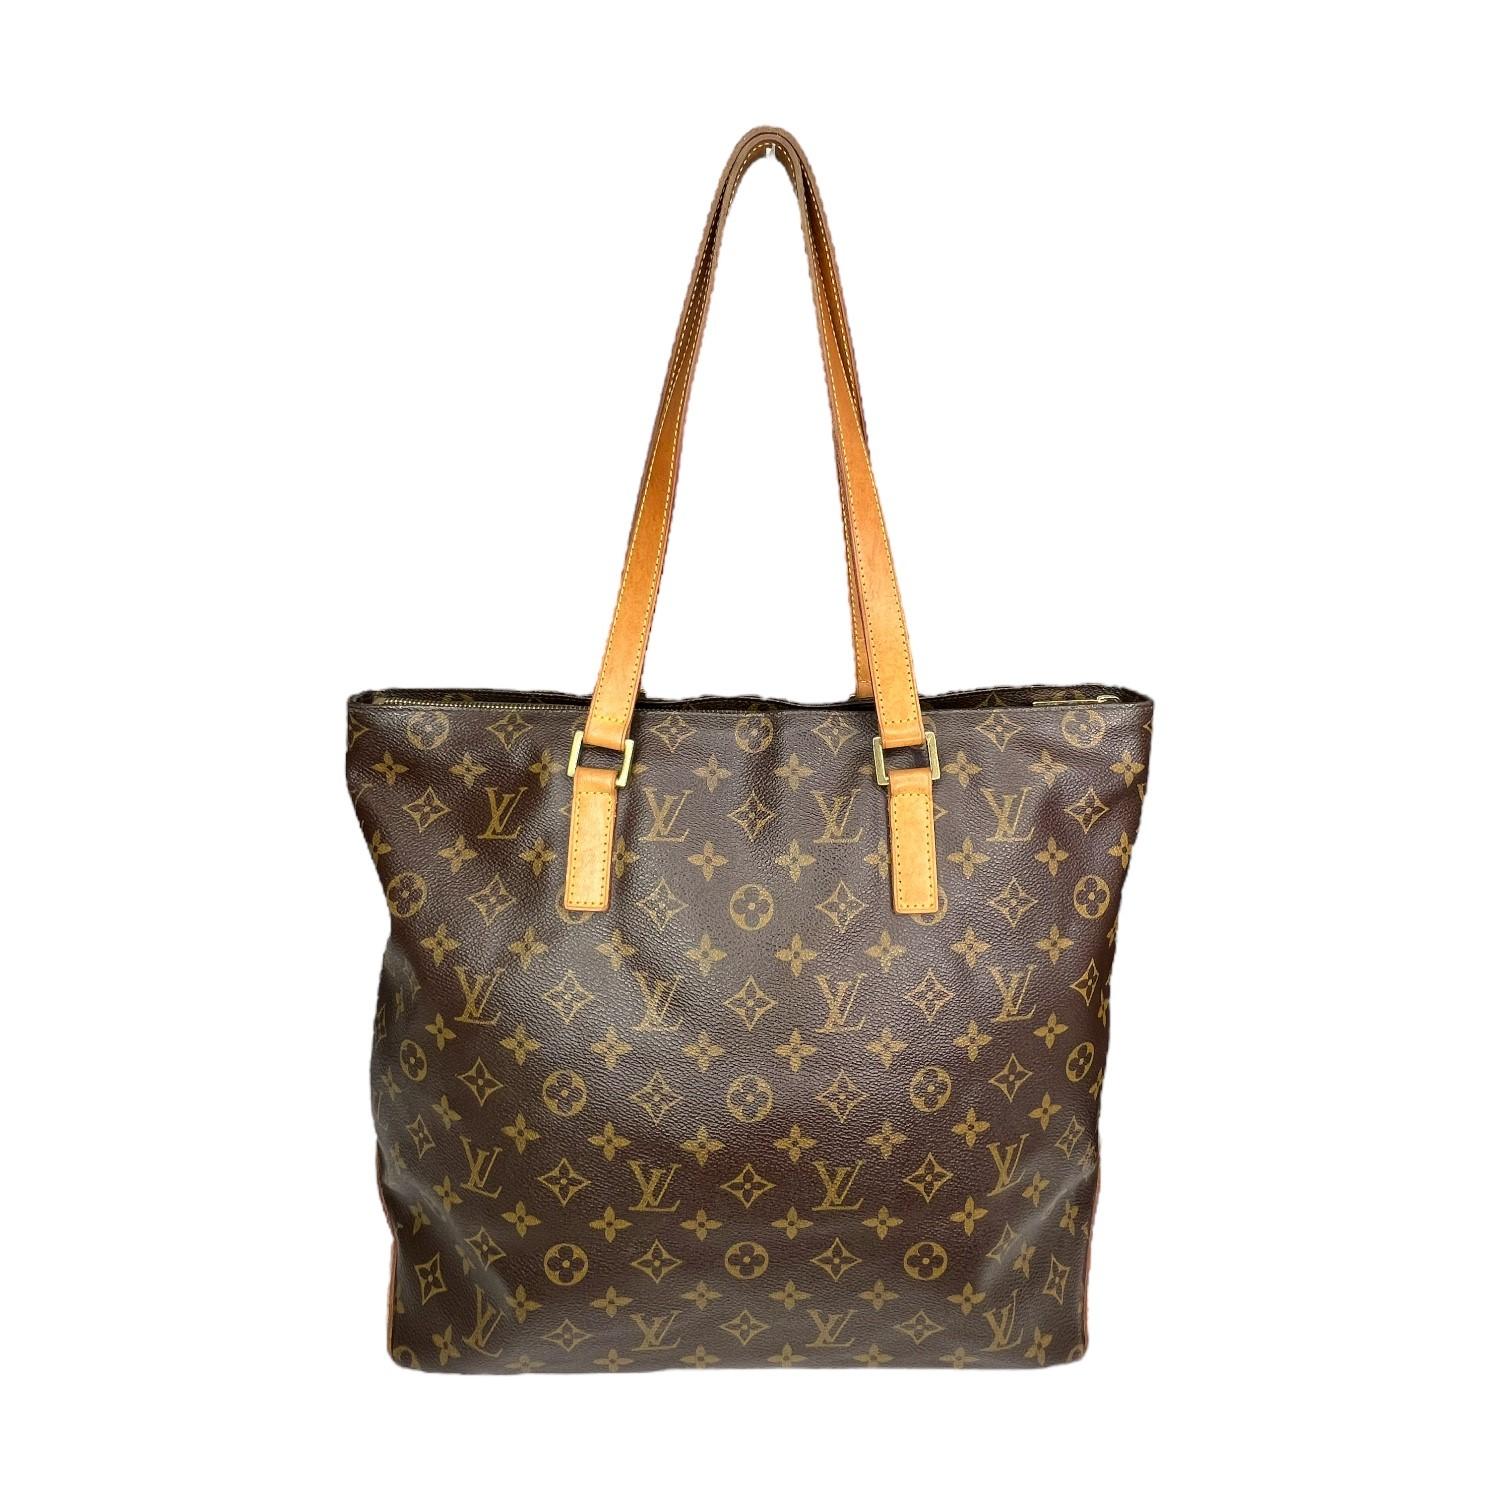 This Louis Vuitton Monogram Cabas Piano Tote was made in the USA in 2002 and it is finely crafted of the classic Louis Vuitton Monogram canvas exterior with leather trimming and gold-tone hardware features. It has dual flat leather shoulder straps.